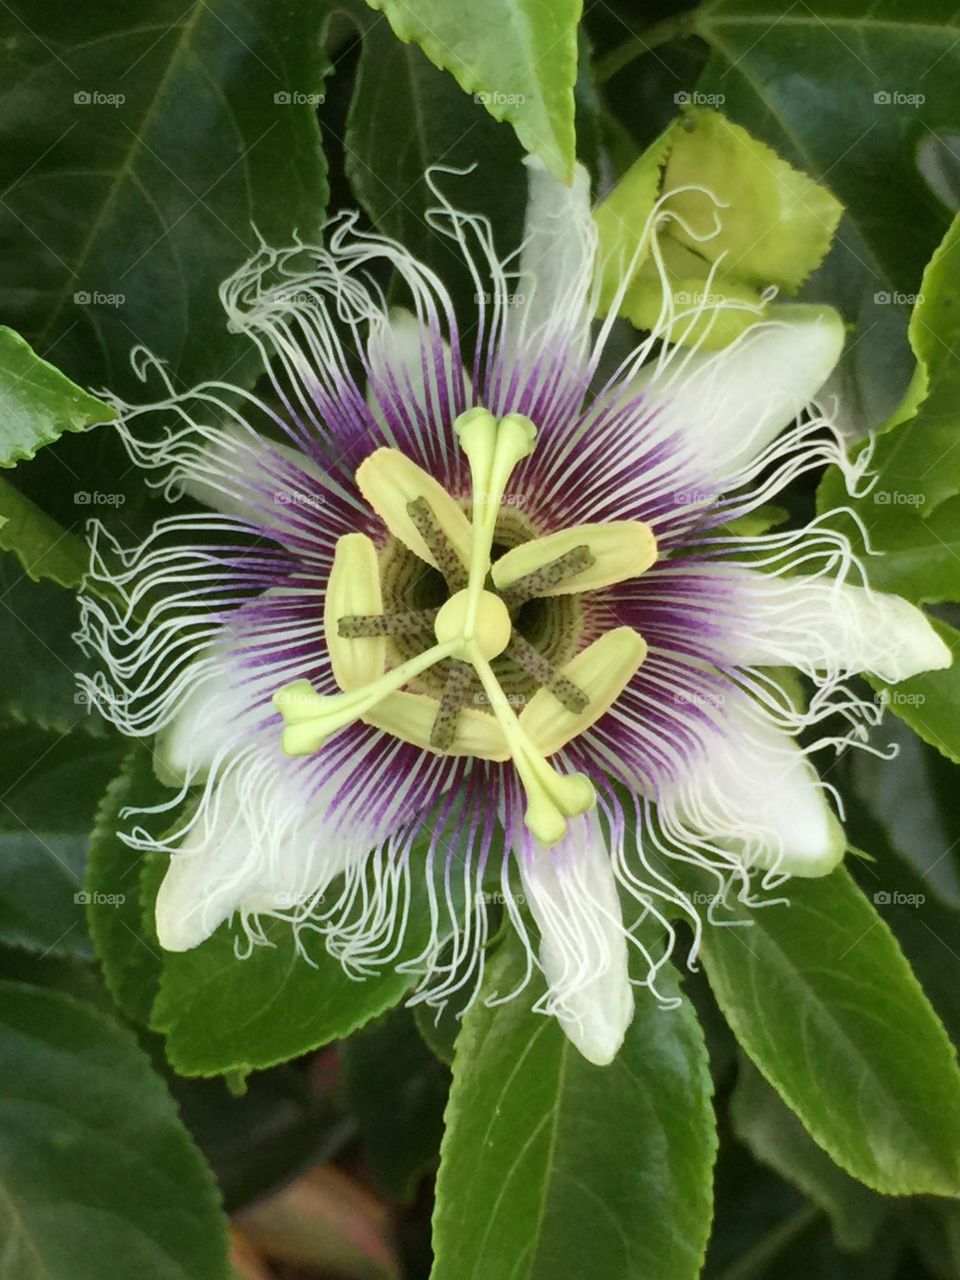 A passion fruit flower with its own type of passion.